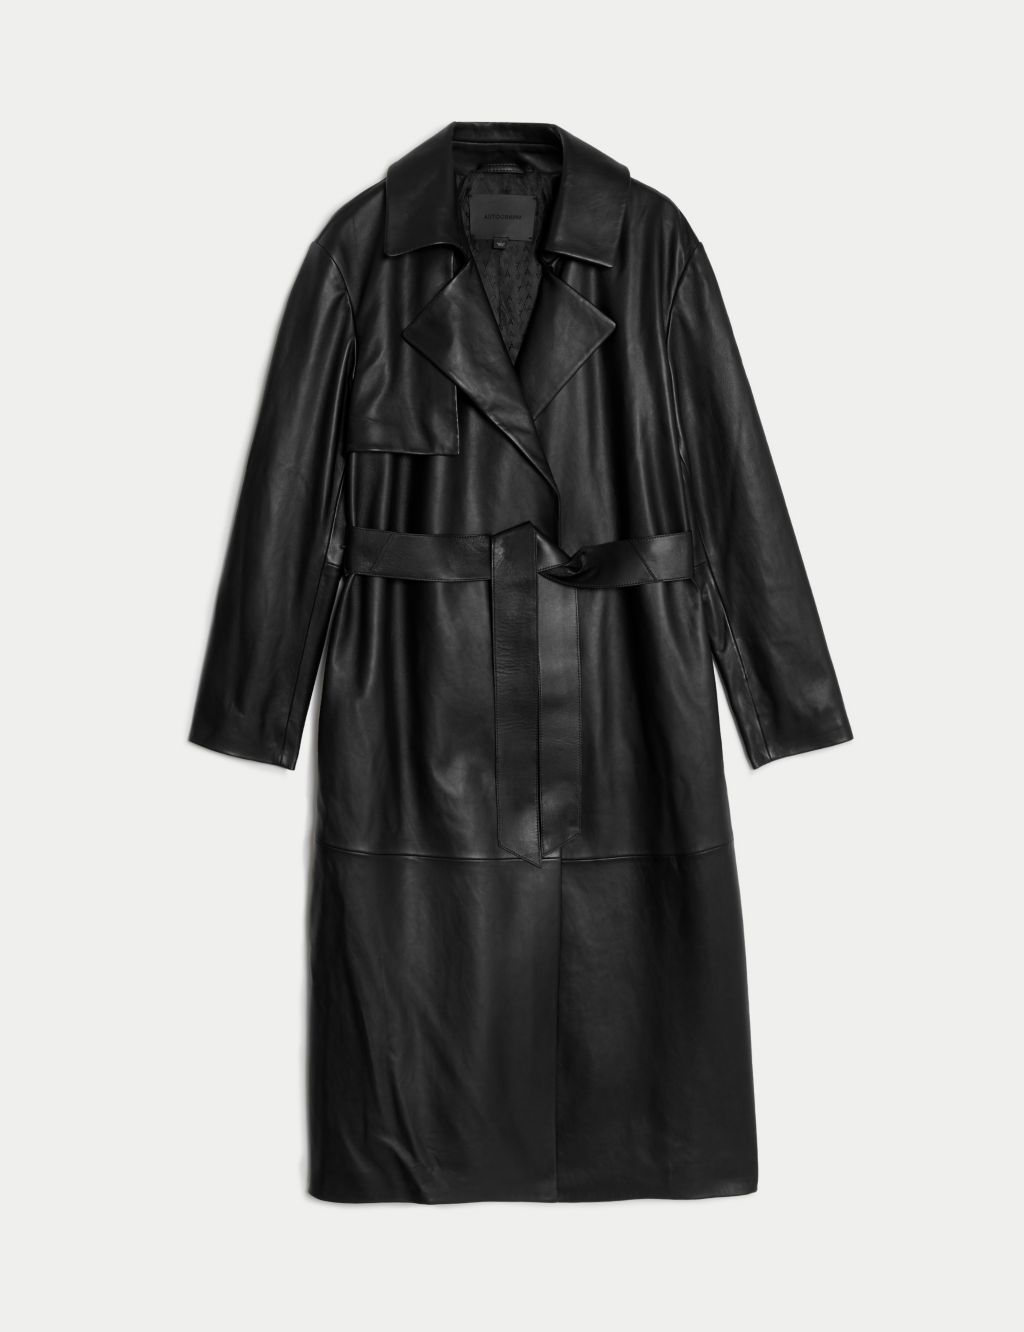 Leather Belted Collared Longline Trench Coat image 2